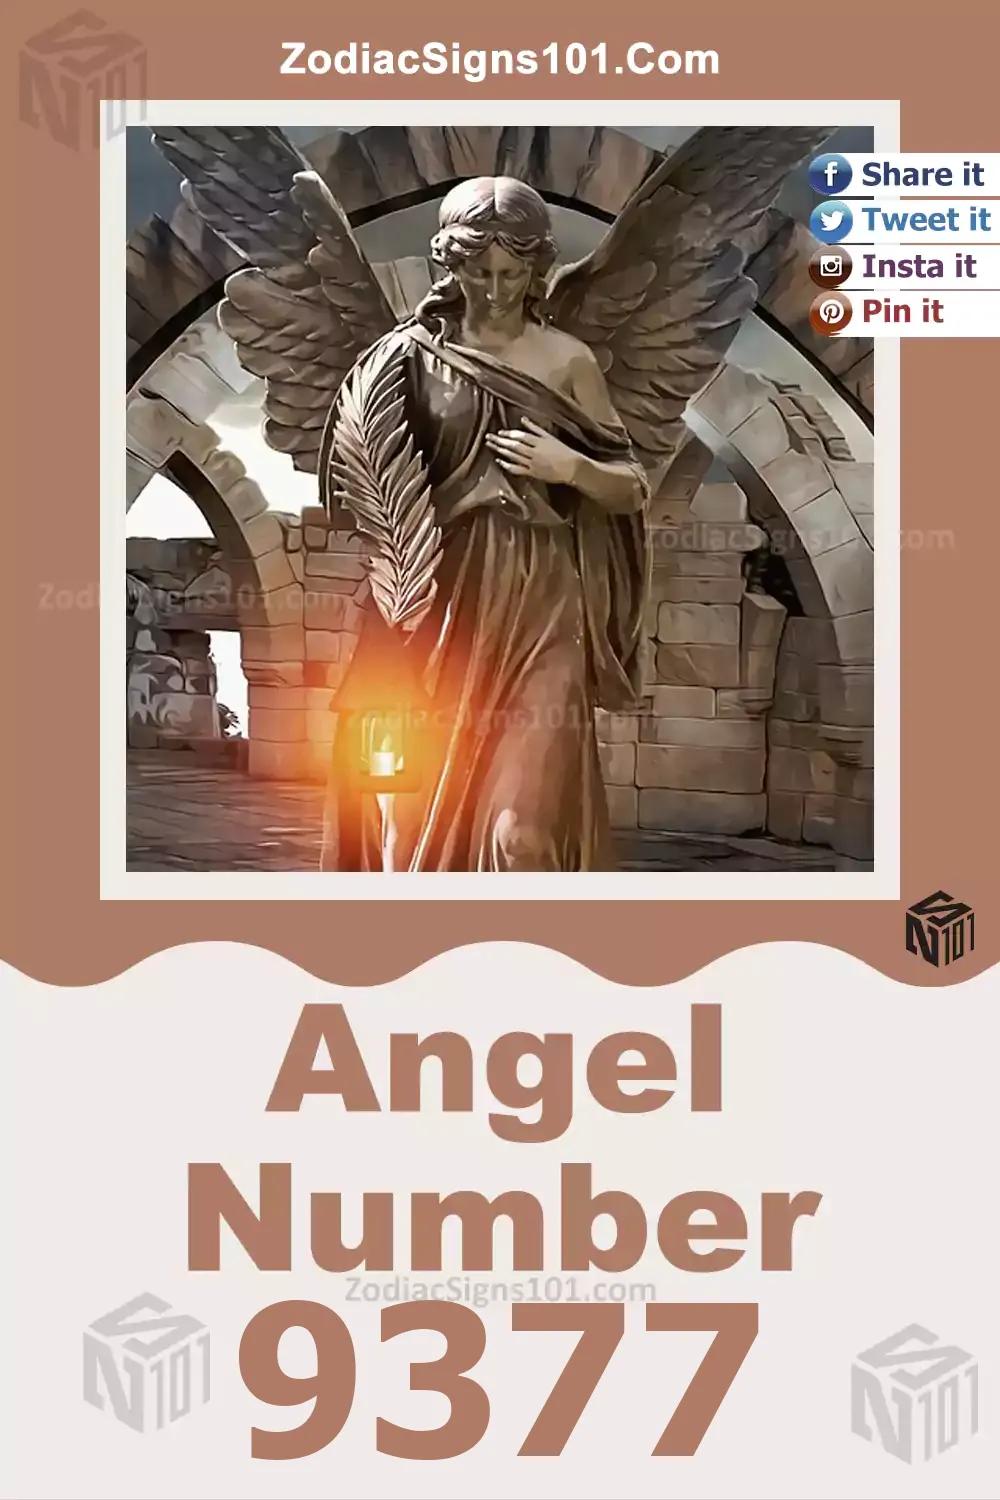 9377 Angel Number Meaning